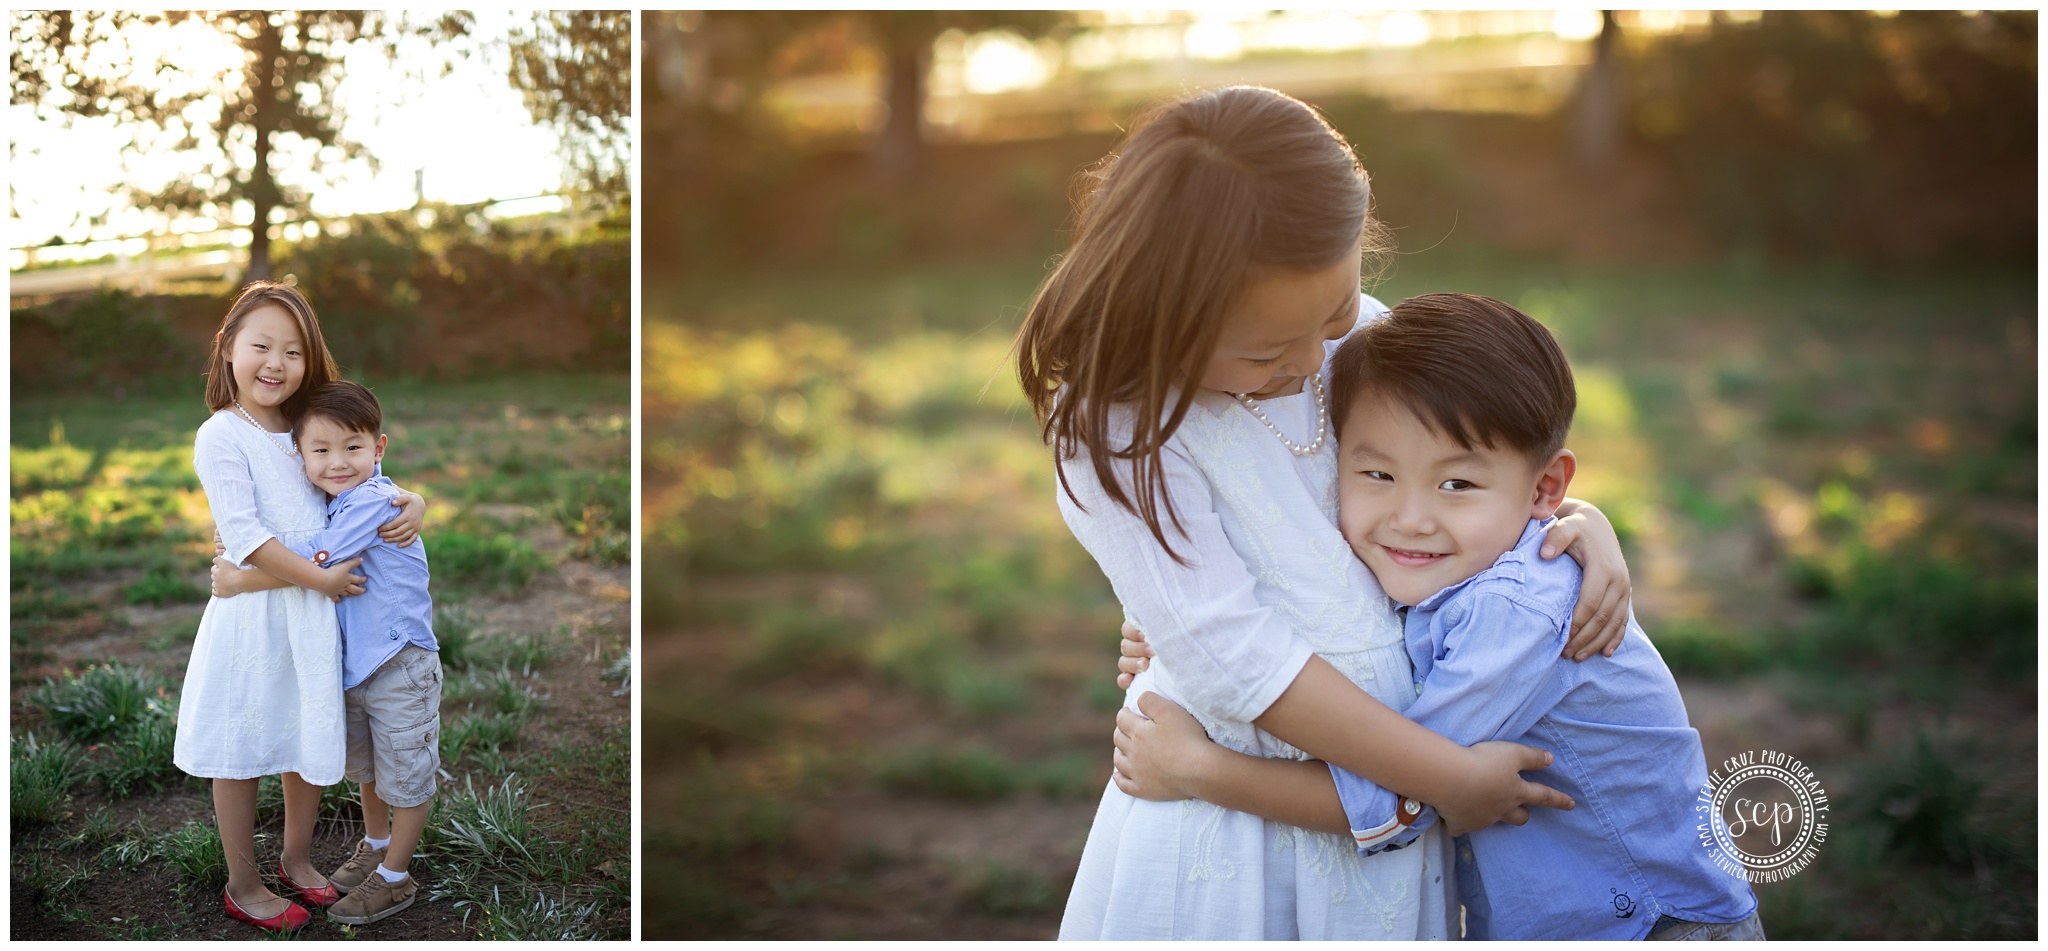 Holiday photo gallery inspiration of siblings. Photos taken in Orange County California.